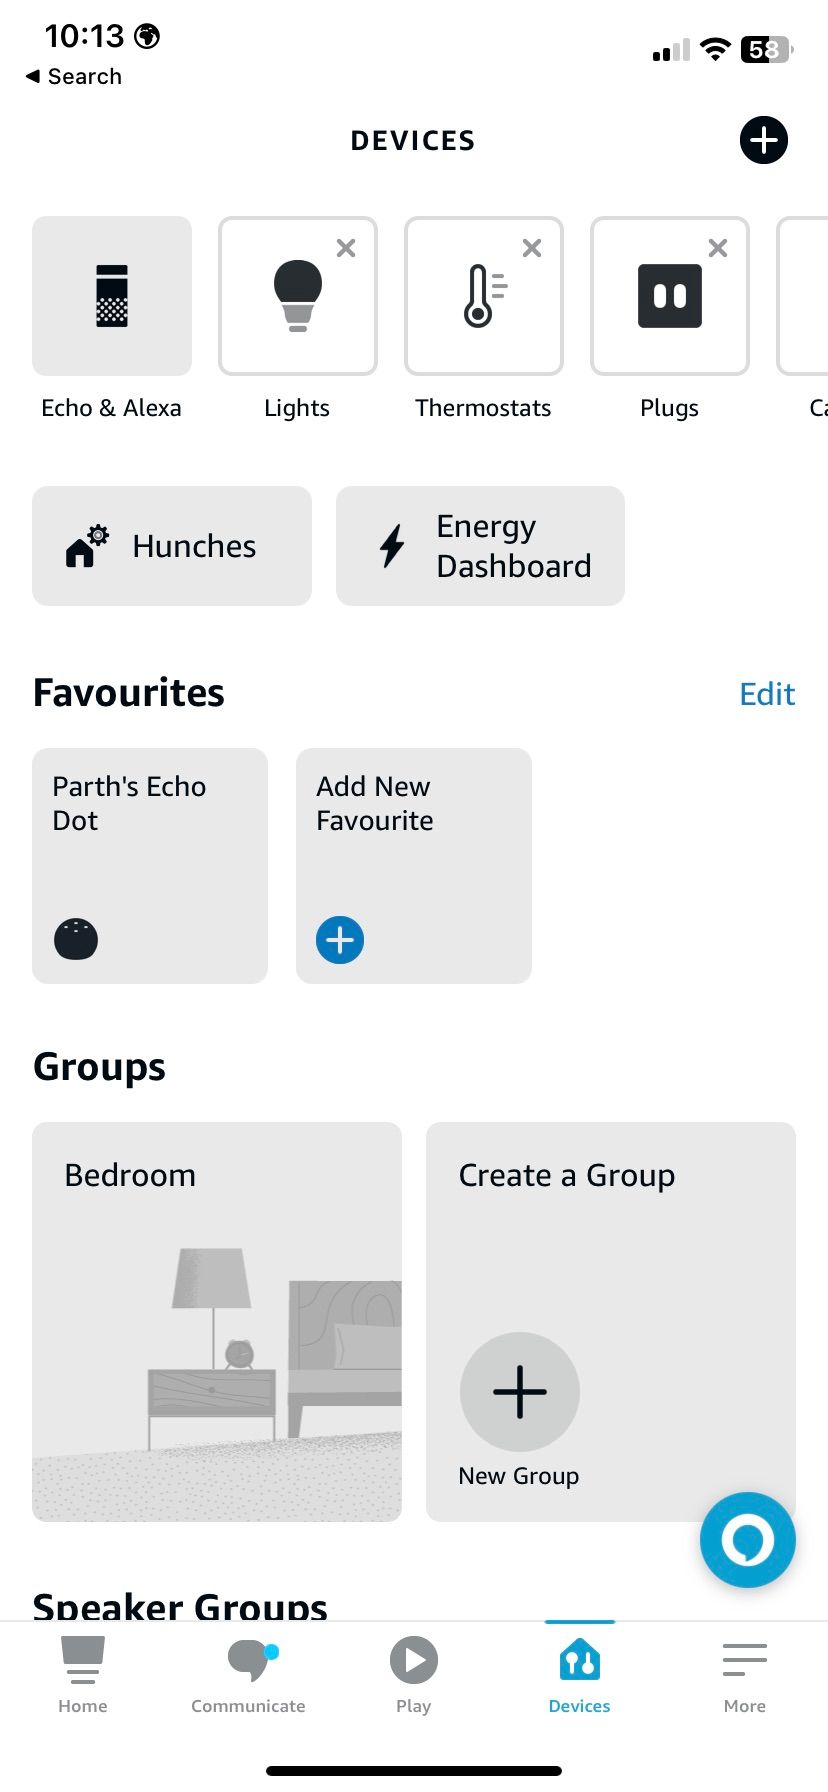 The Amazon Alexa app showing the "Devices" tab page.